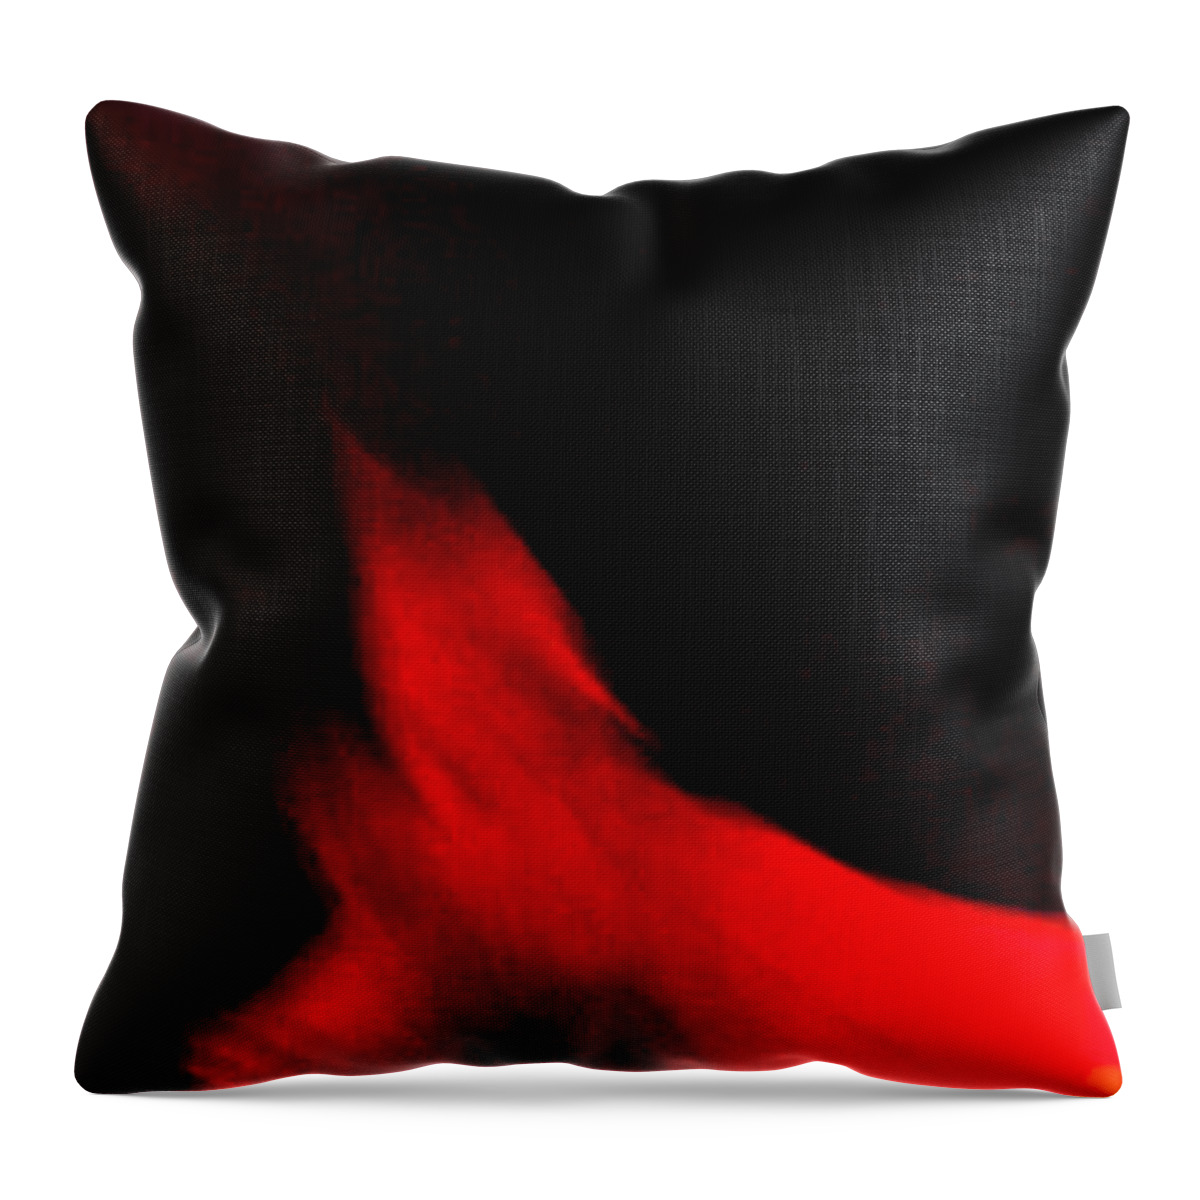 Andalusia Throw Pillow featuring the photograph Flamenco Series 25 by Catherine Sobredo